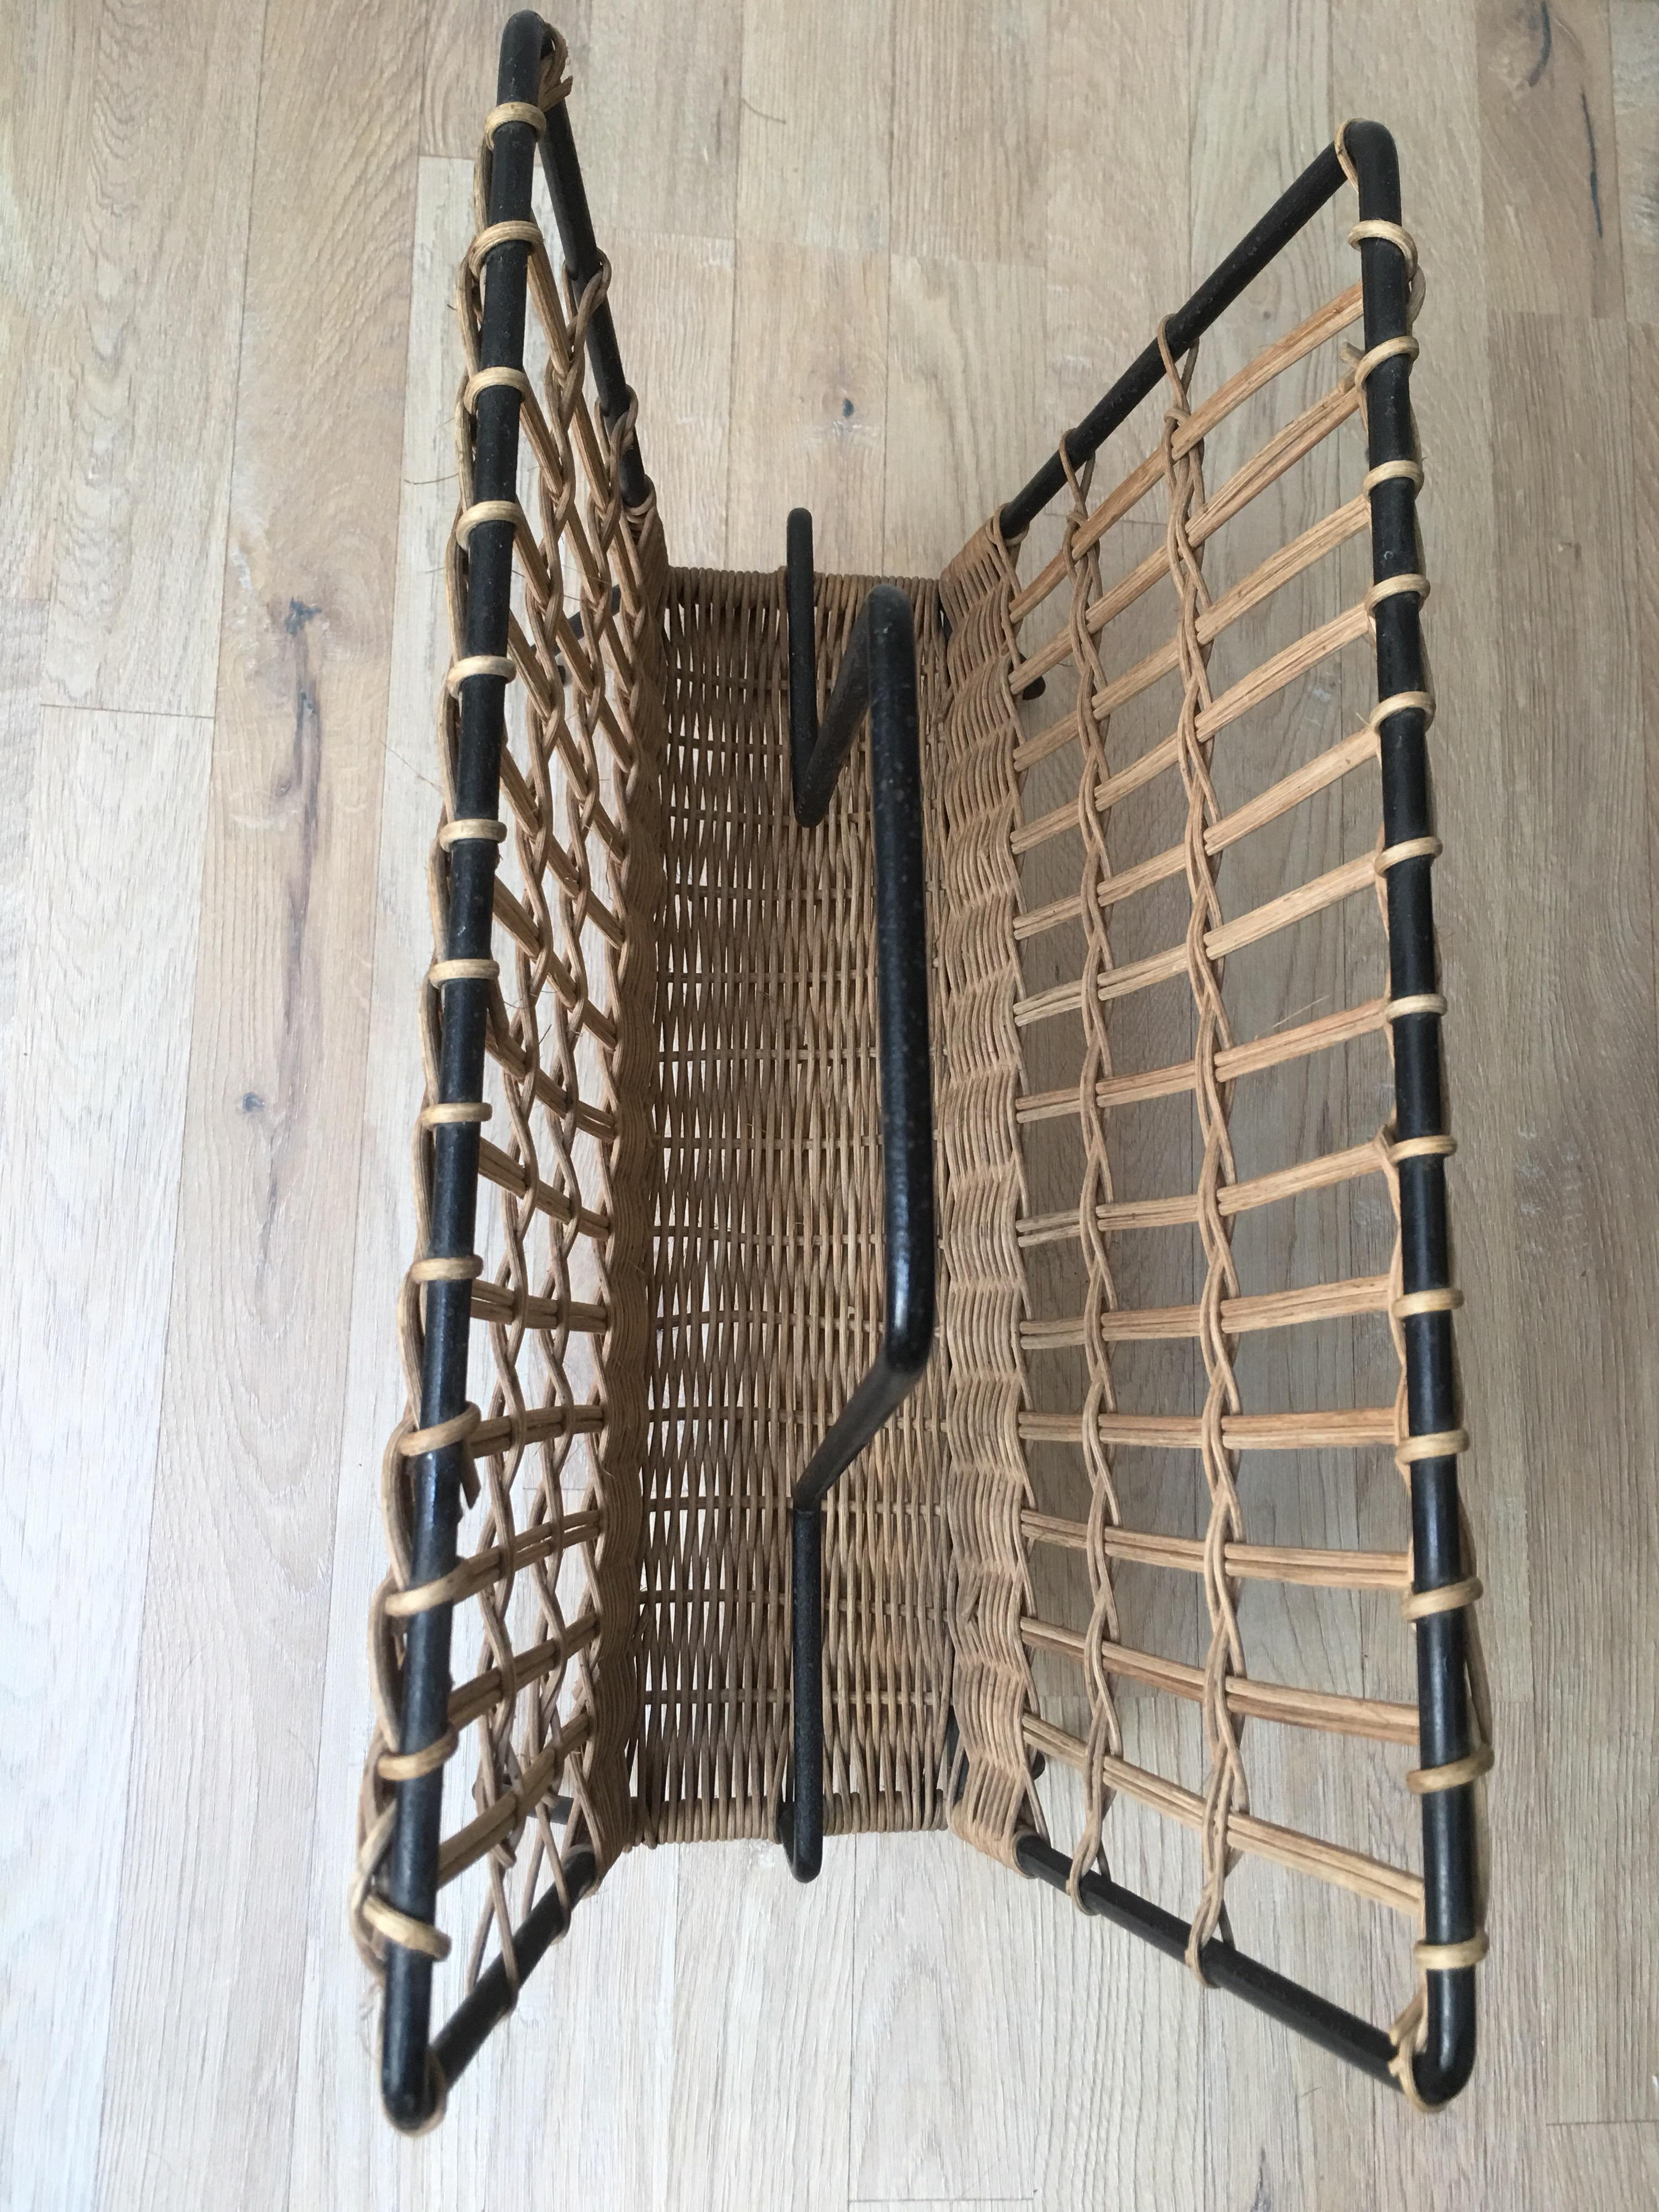 Louis Sognot Pair of Iron and Wicker Magazine Rack, French, 1950s For Sale 5